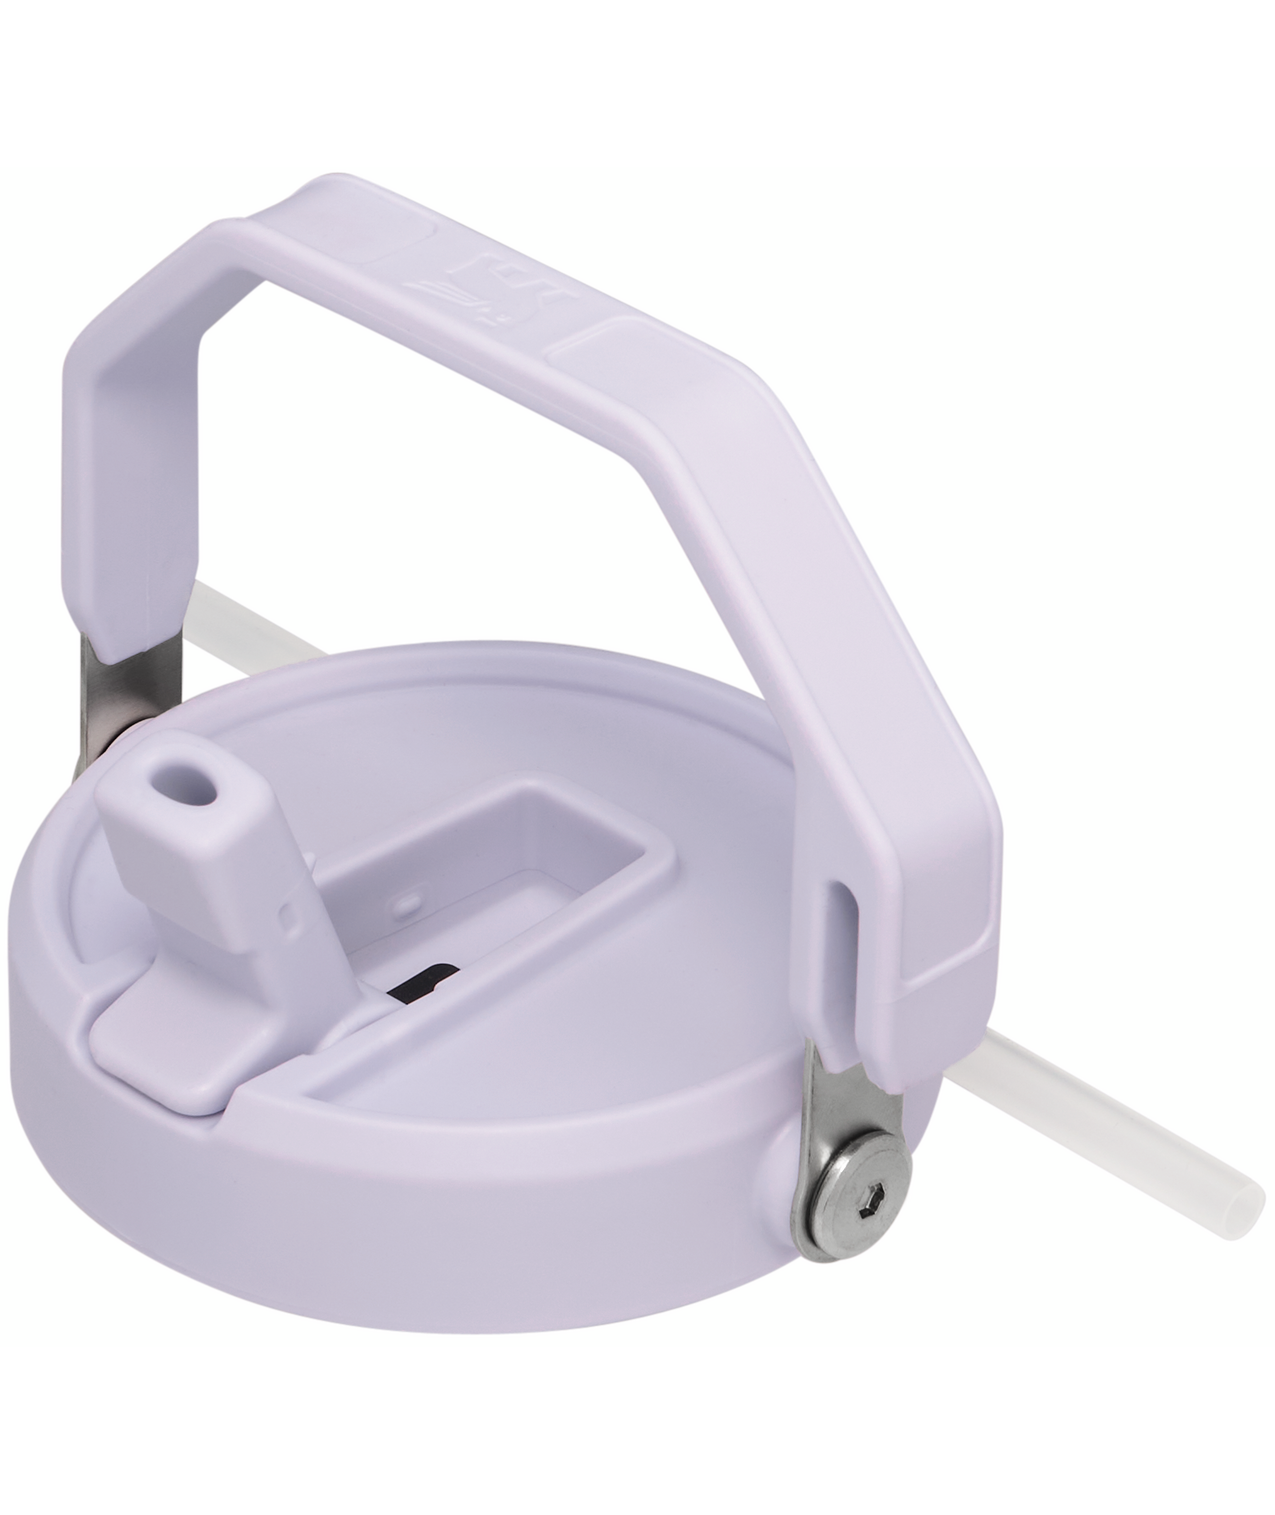 Stanley Double-Wall Vacuum Insulated - Lavender ICEFLOW FLIP STRAW